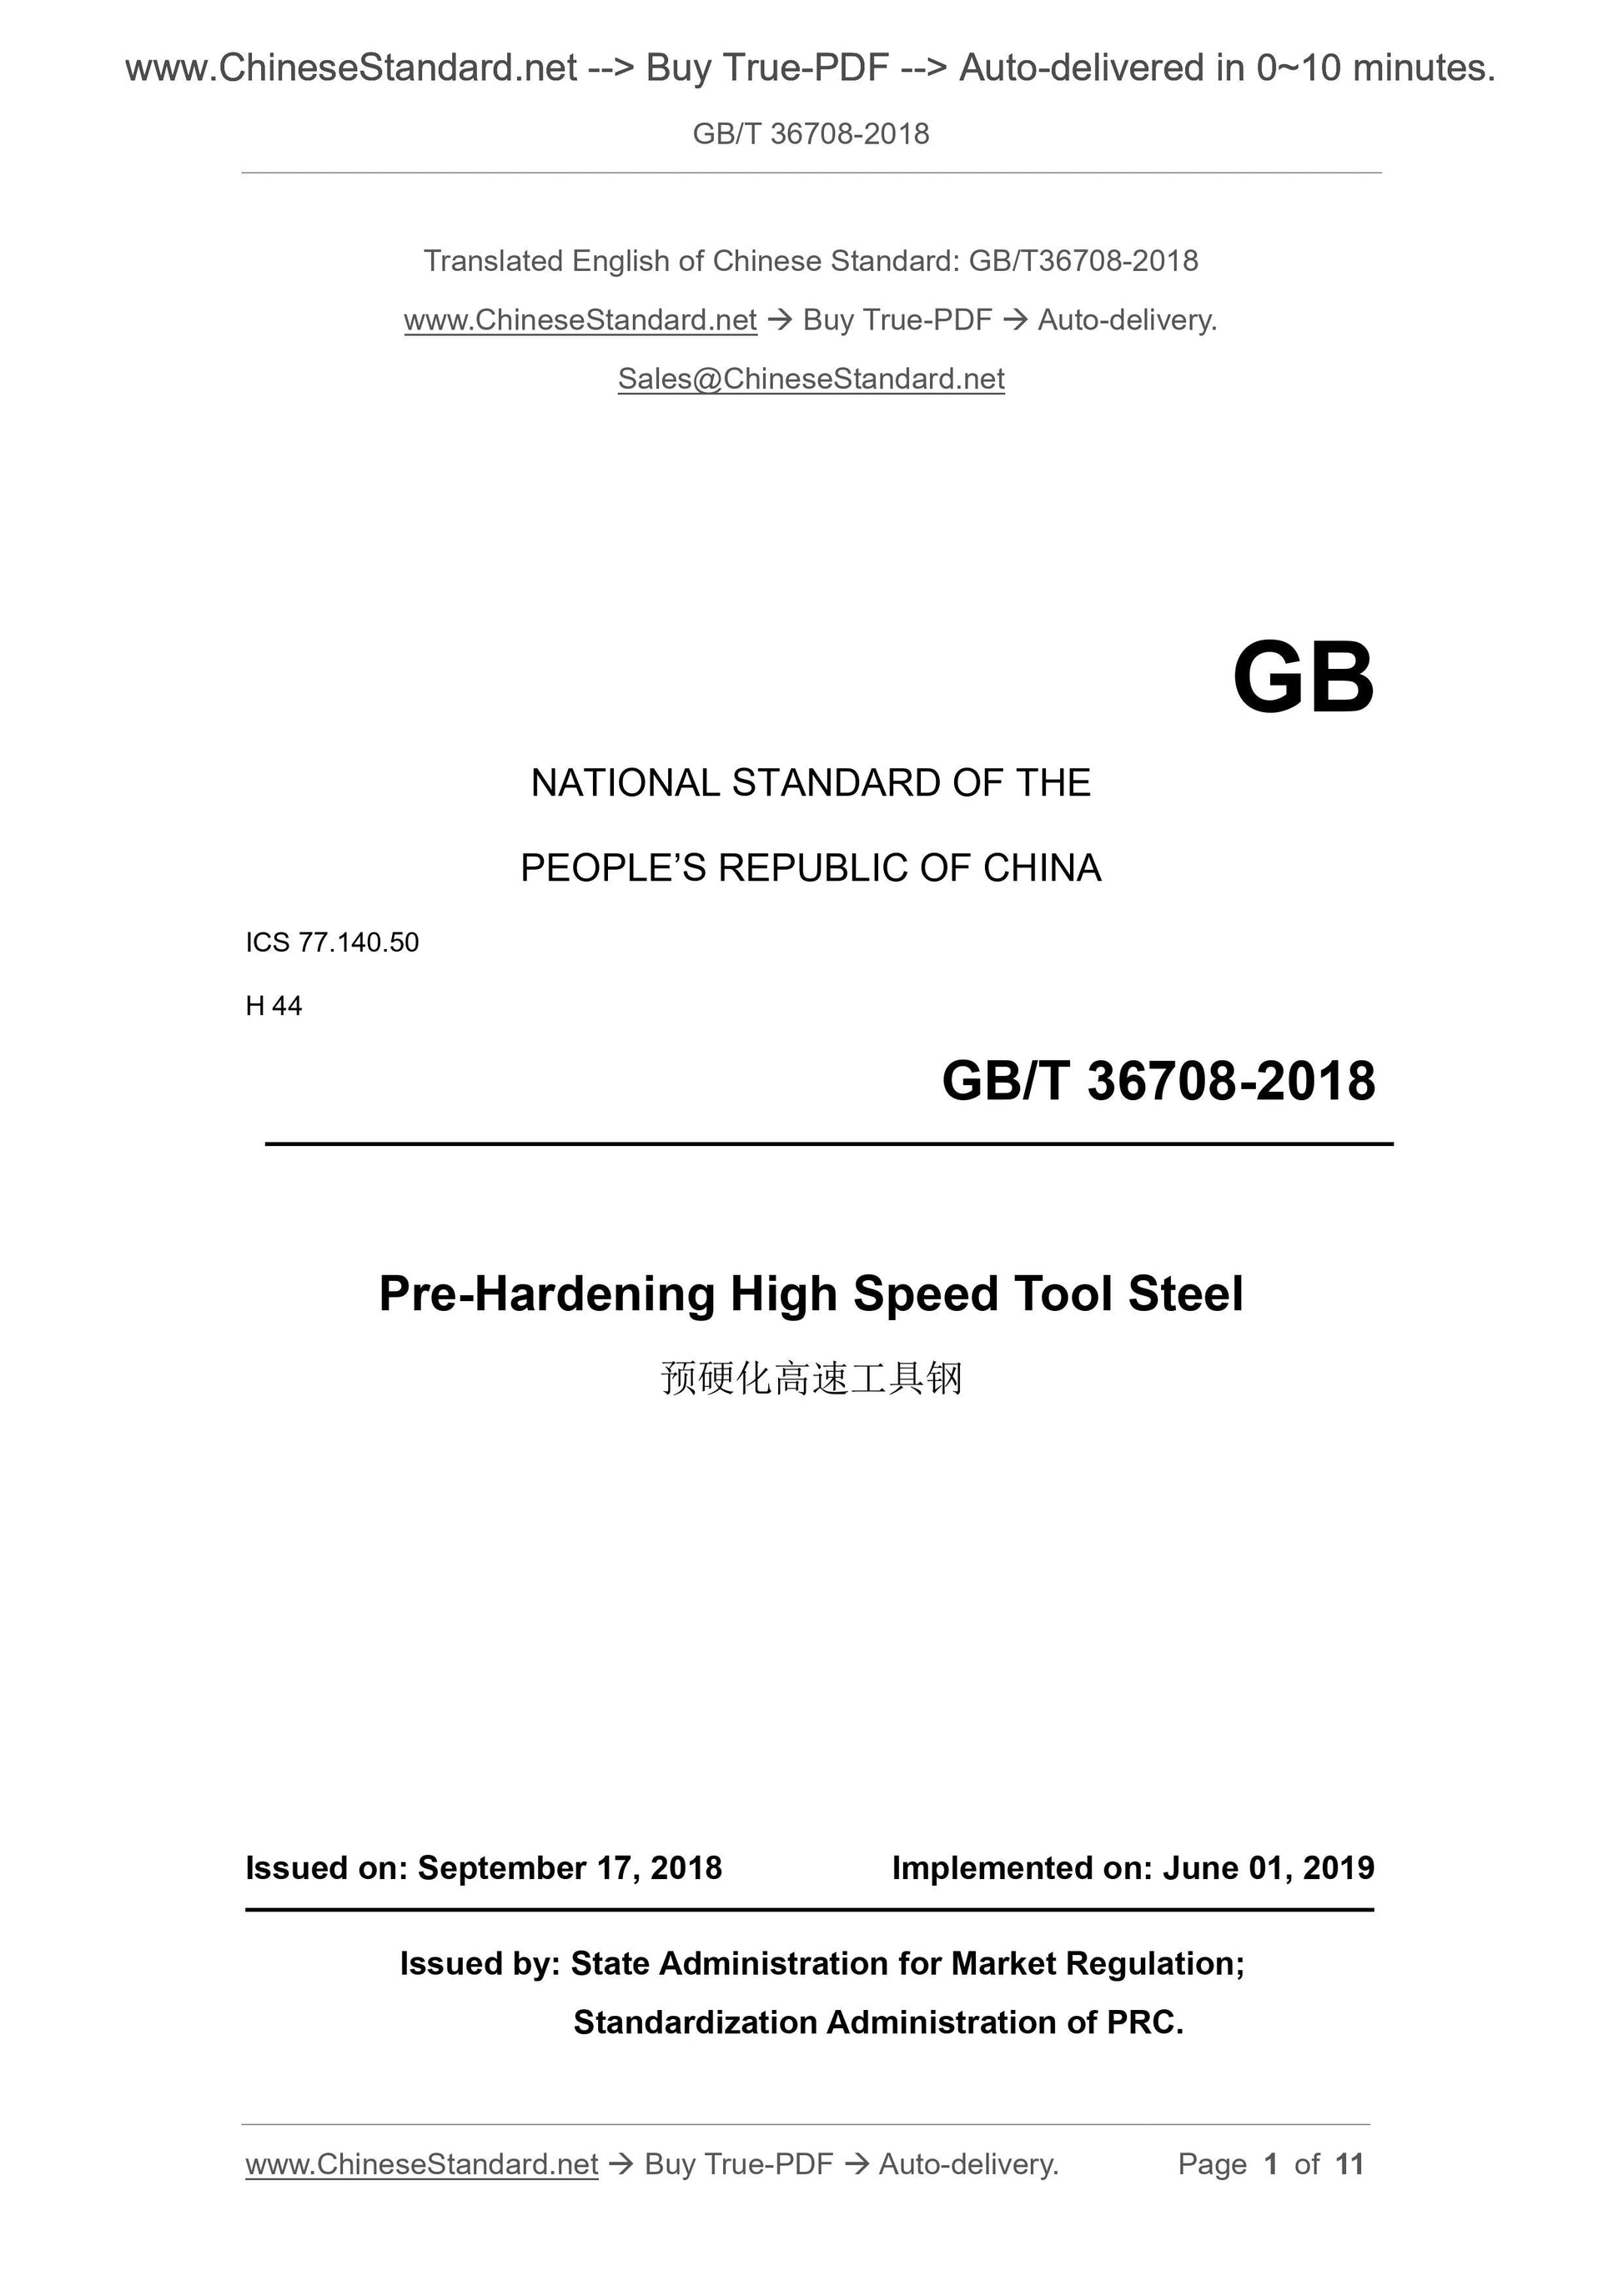 GB/T 36708-2018 Page 1